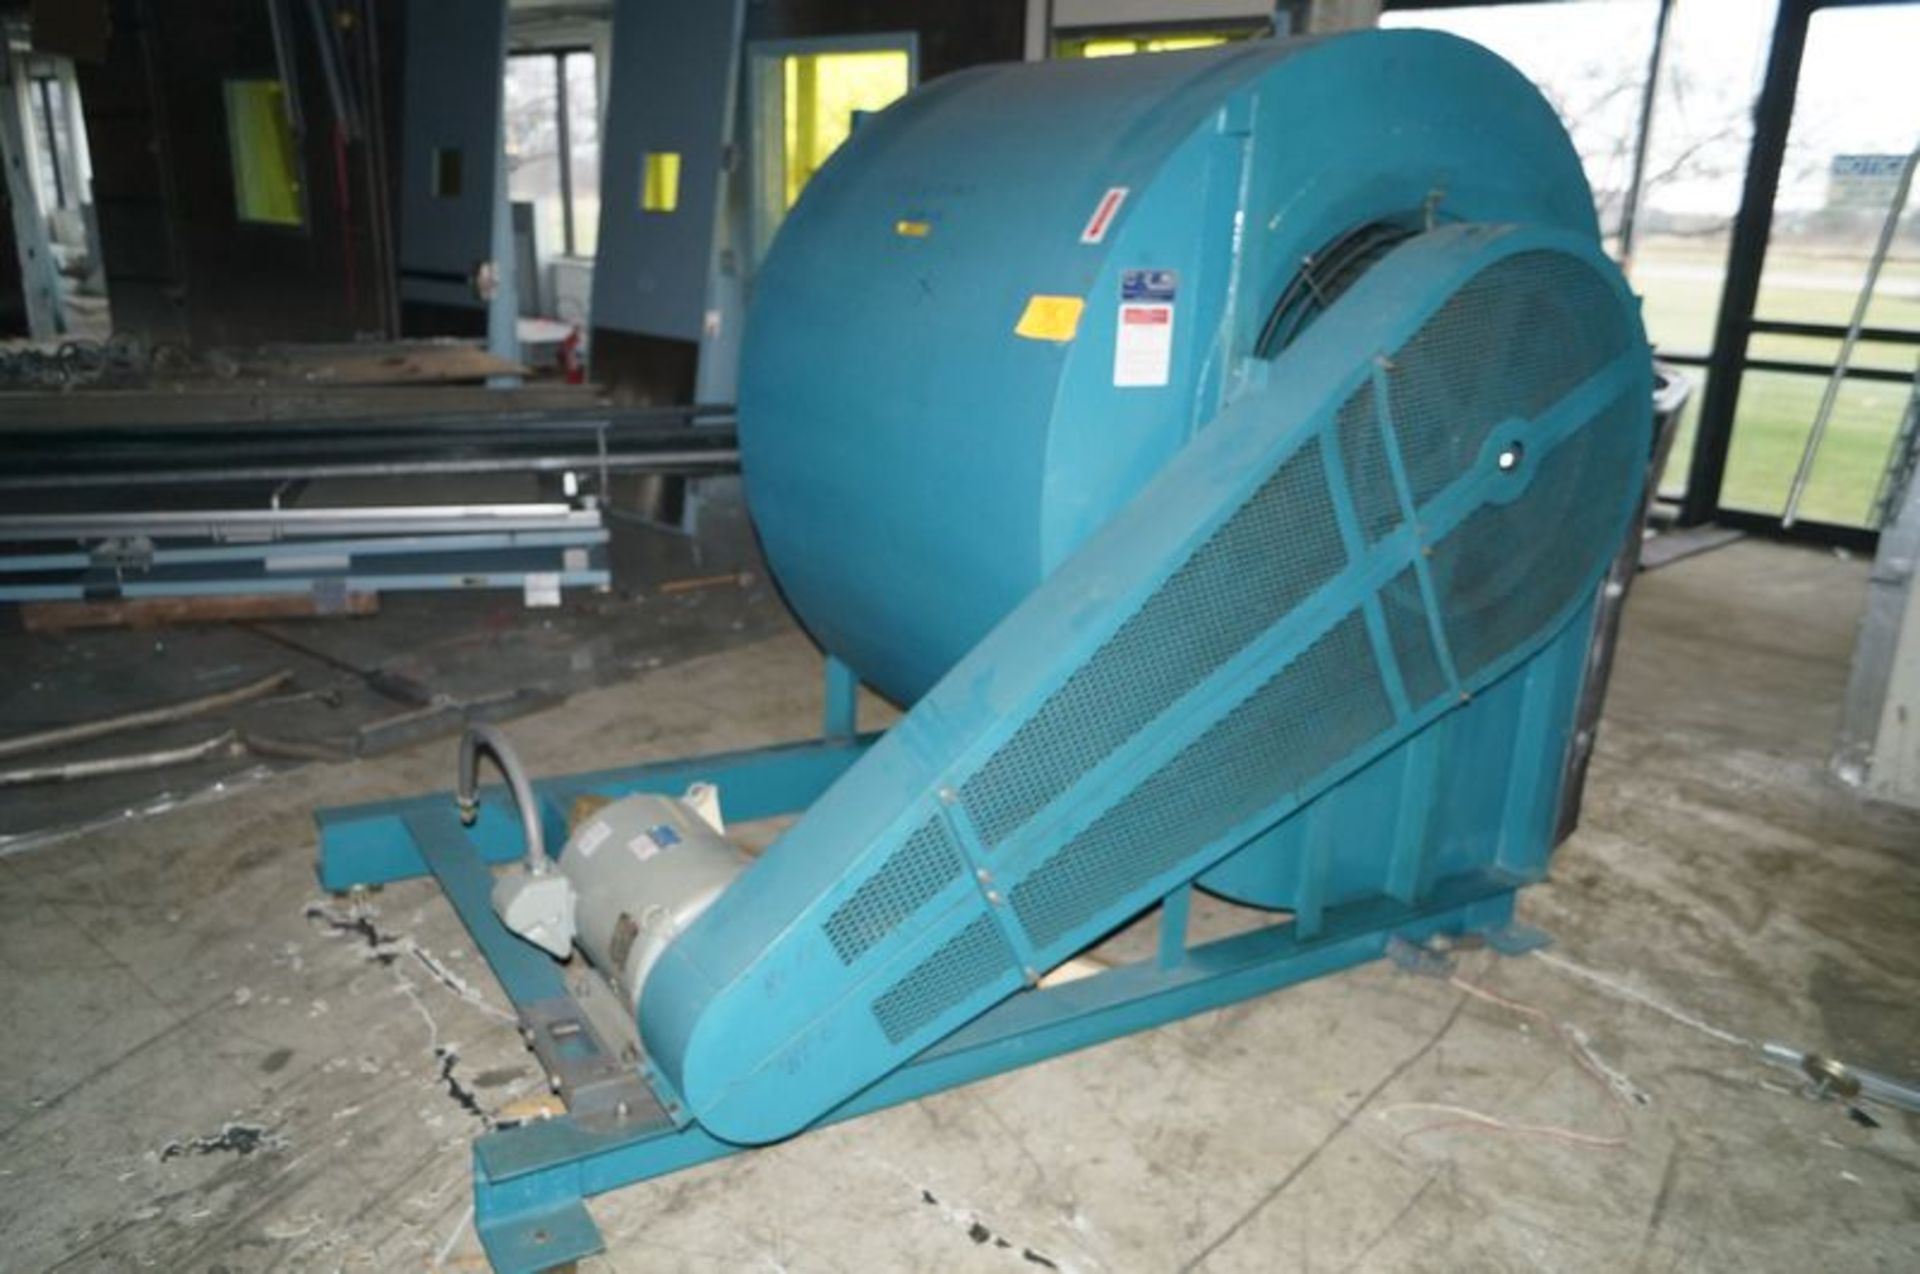 TWIN CITY FAN AND BLOWER UNIT, SIZE 36 , TYPE FC, CLASS 1 ARR 3F, 15 HP S/N 11-1 *Does not include